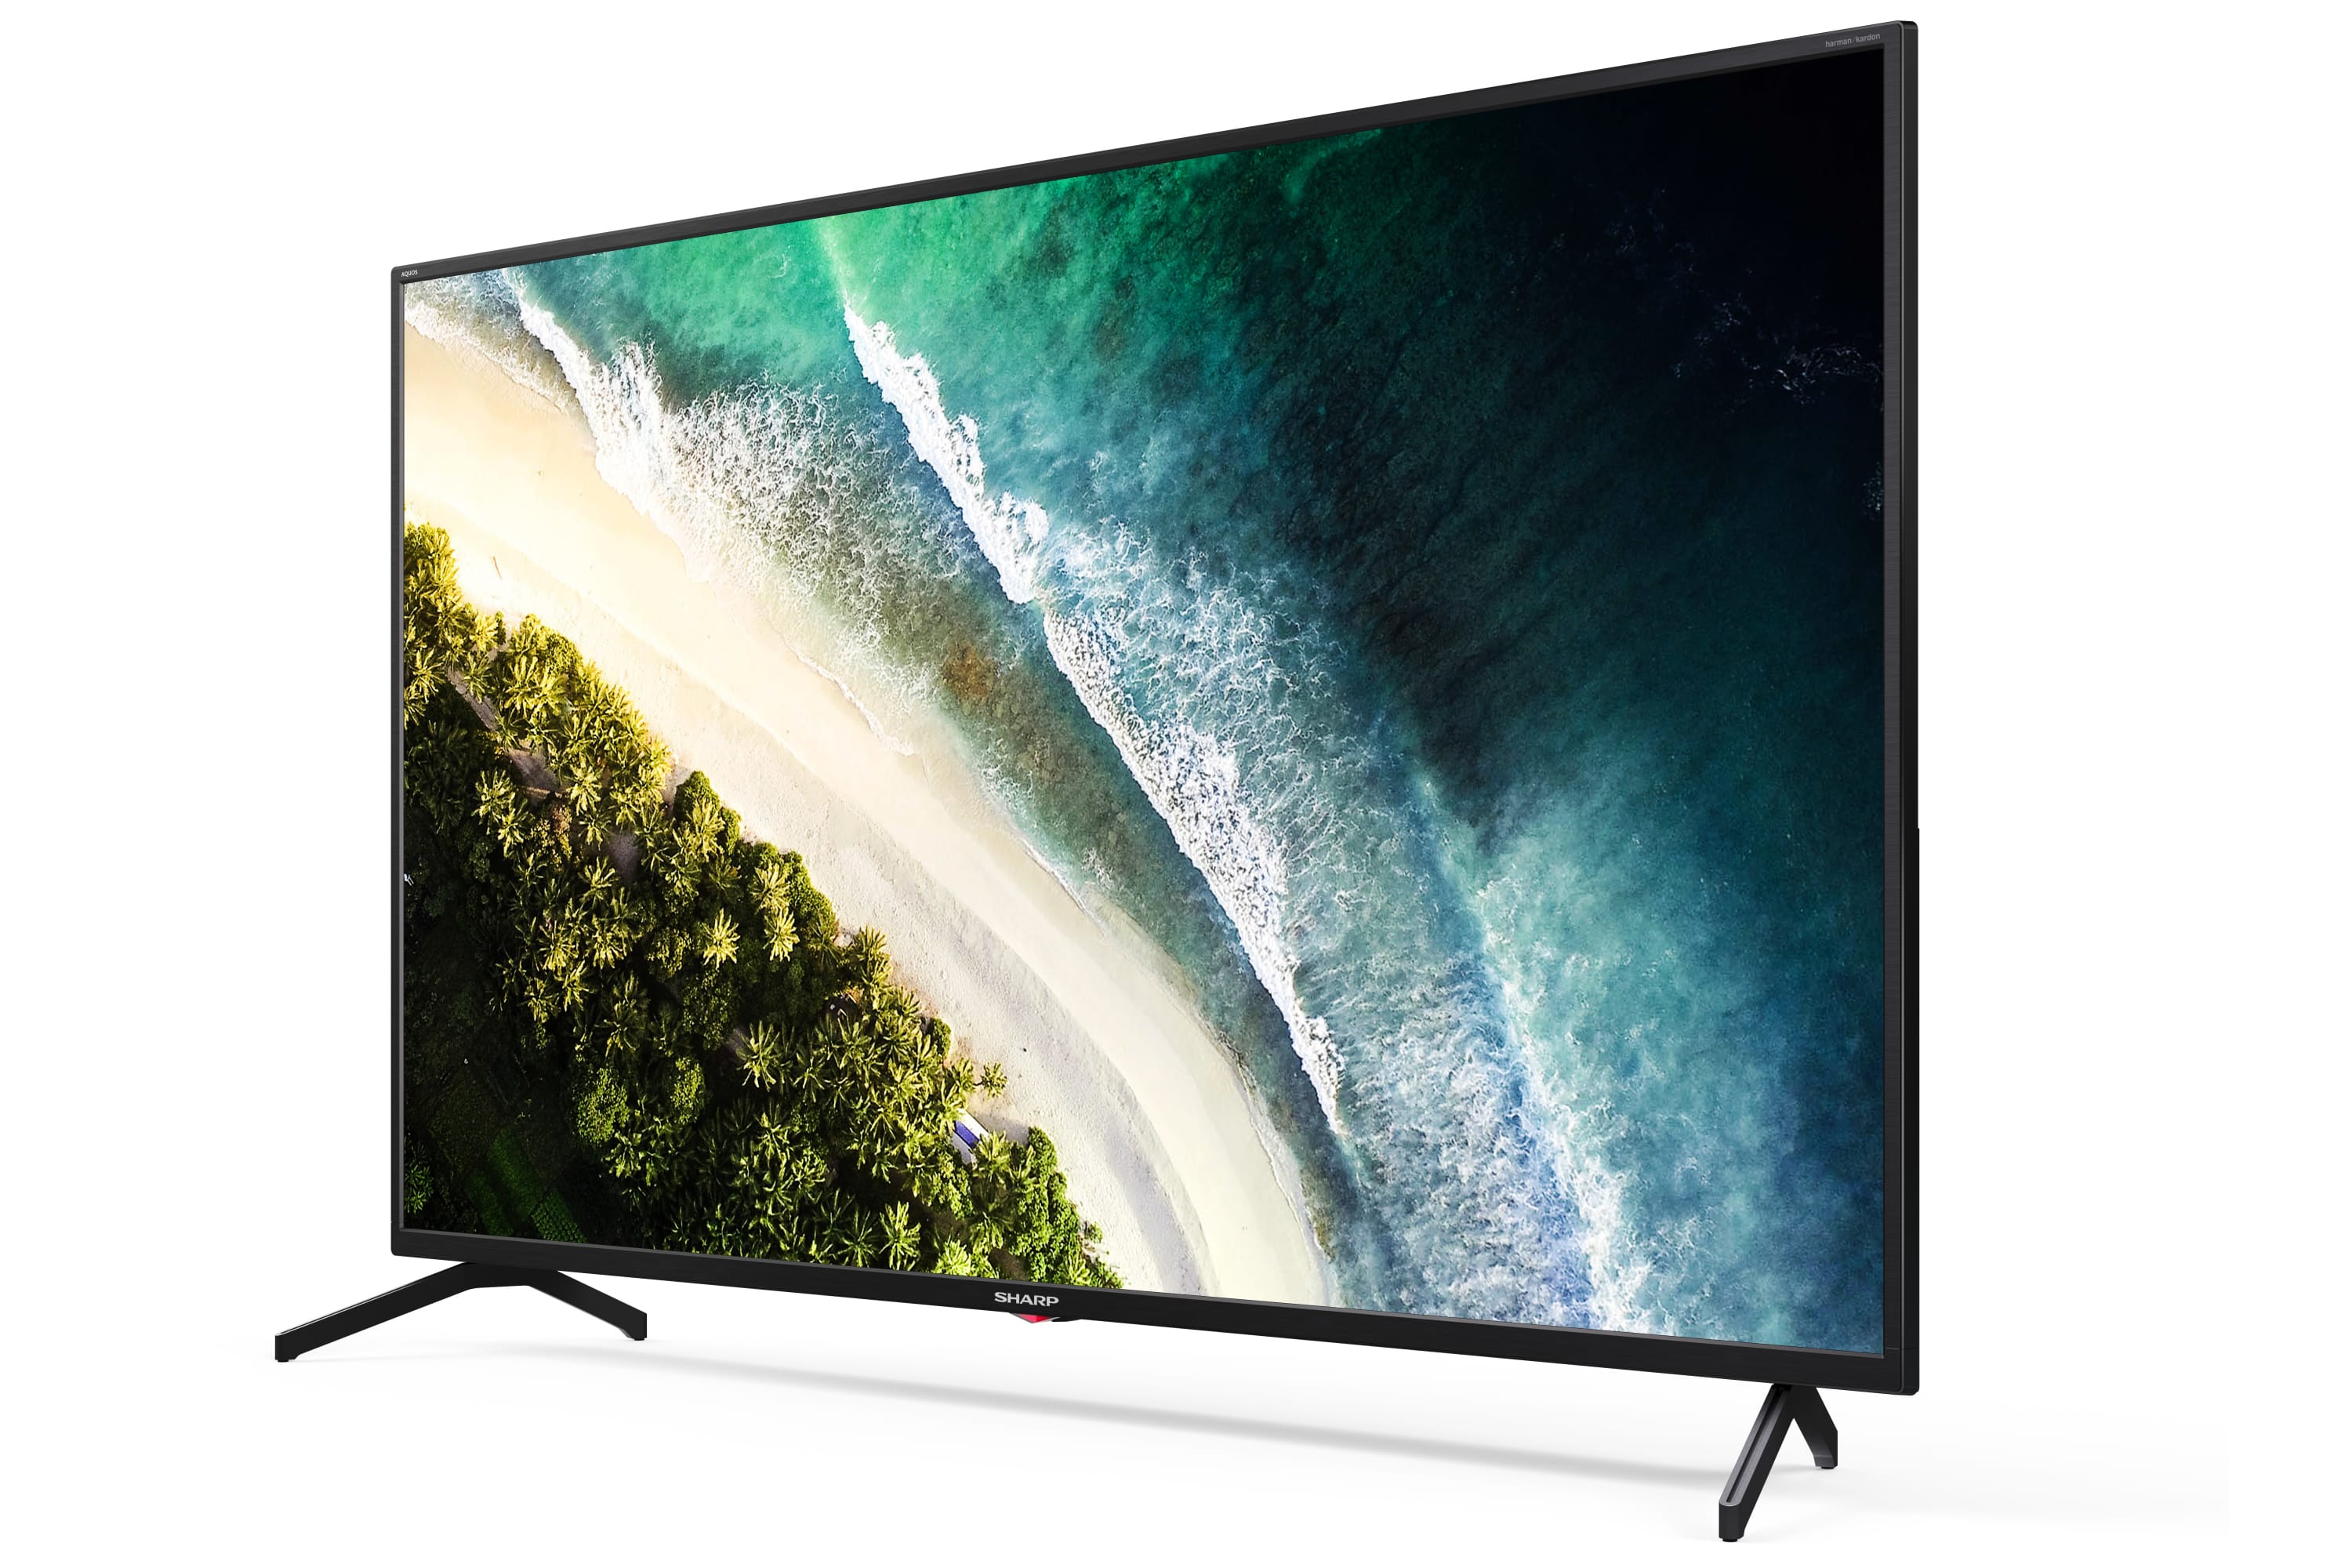 Android TV 4K UHD - 50" ANDROID TV™ ULTRA HD 4K